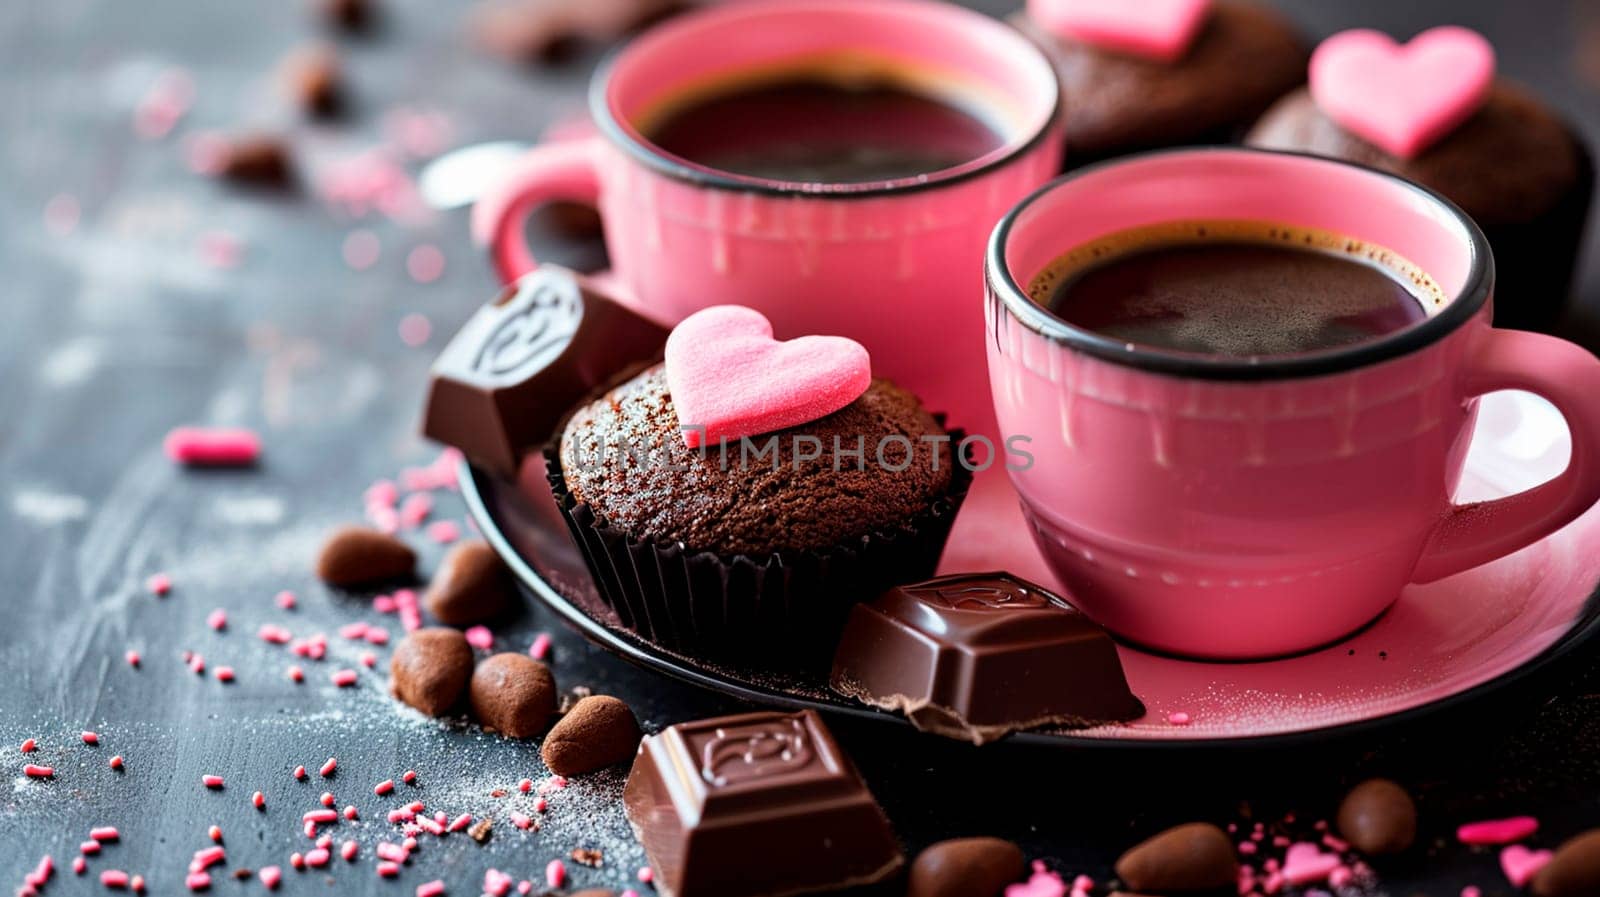 Pink and black cup of coffee with hearts on the table for Valentine's Day. Selective focus. Drink.